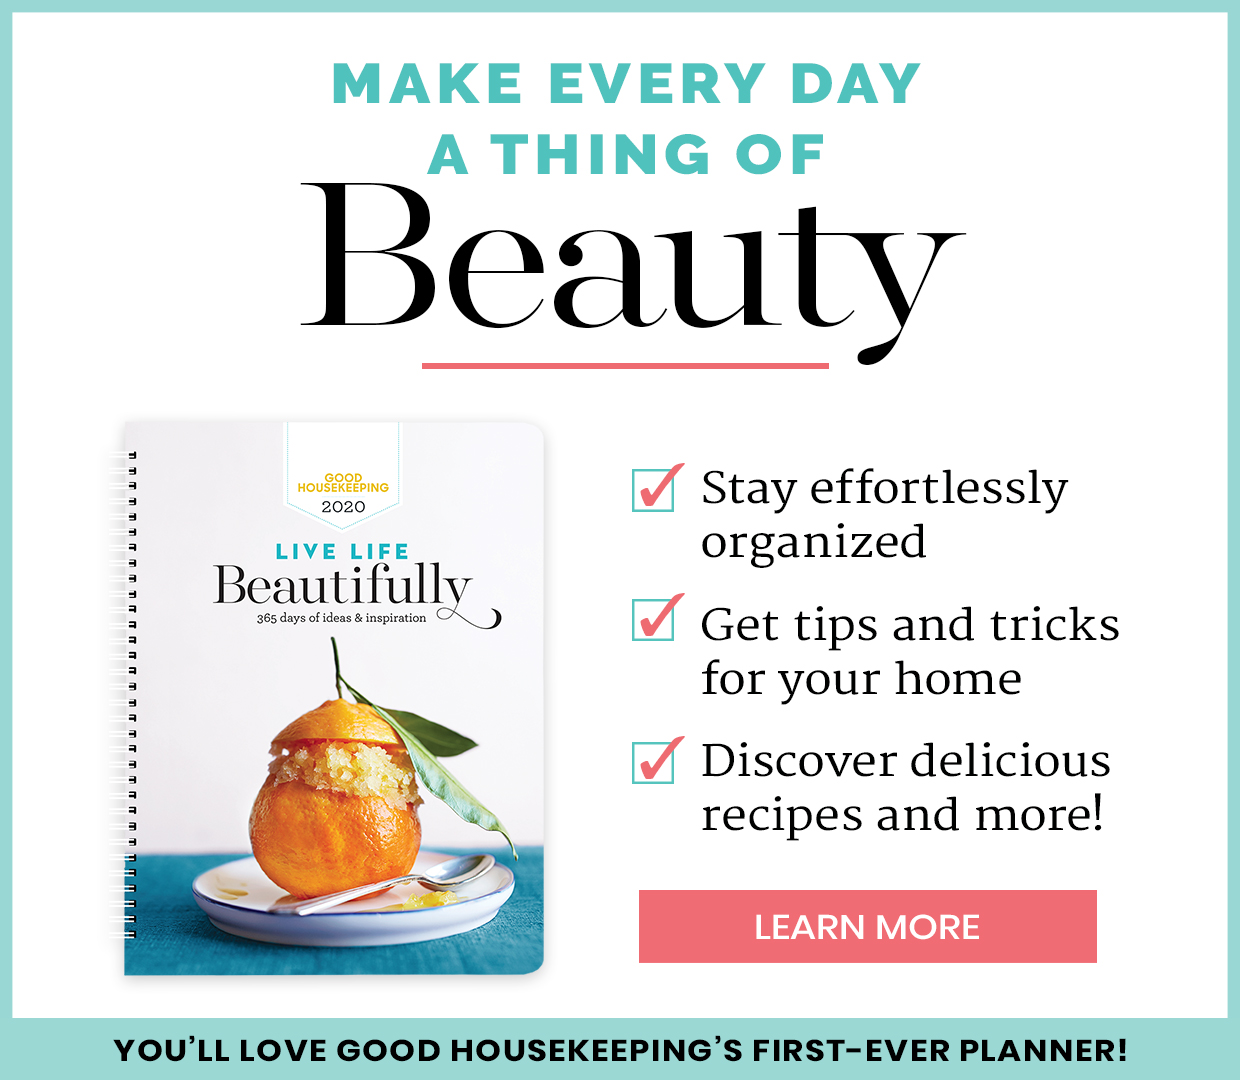 Introducing Good Housekeeping’s first ever planner. Part weekly agenda, part happiness handbook, Live Life Beautifully is the essential guide to a year well-lived.